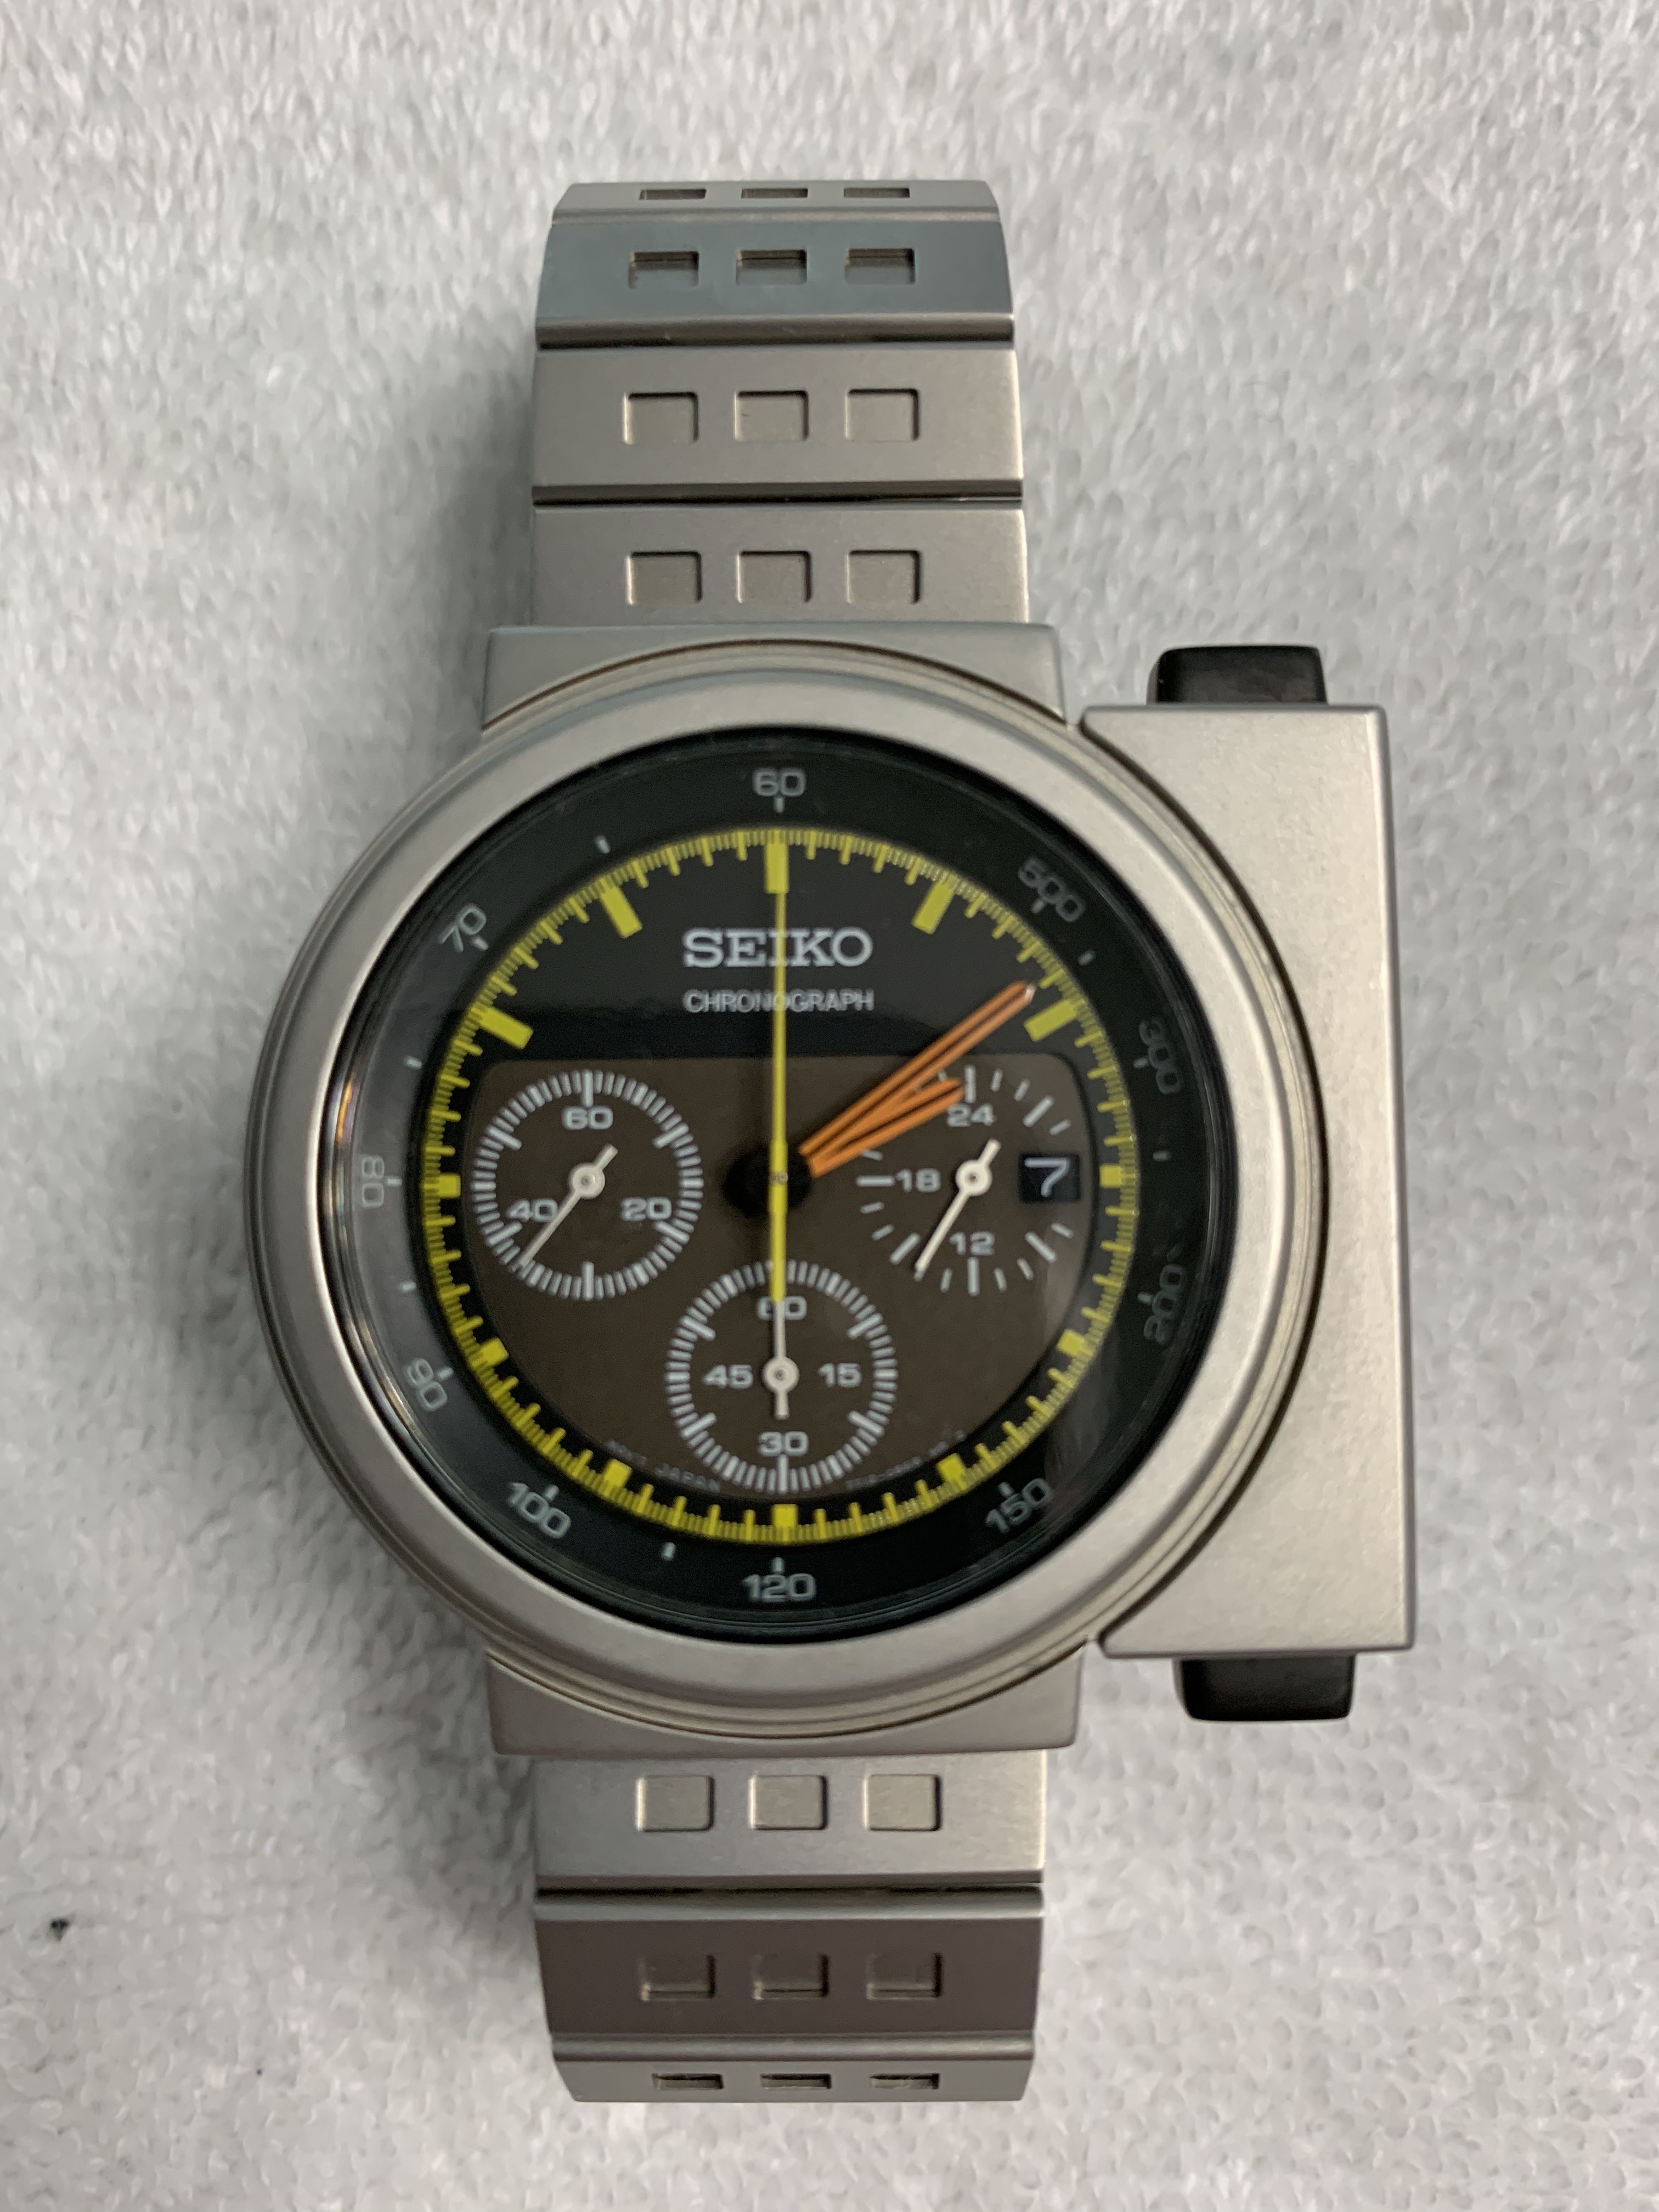 Stor eg infrastruktur prototype FOR SALE: Limited Edition Seiko SCED035 "Ripley" Chronograph Designed by  Giorgetto Giugiaro & Seen In The Movie Aliens #1105/3000 Full Kit |  WatchCharts